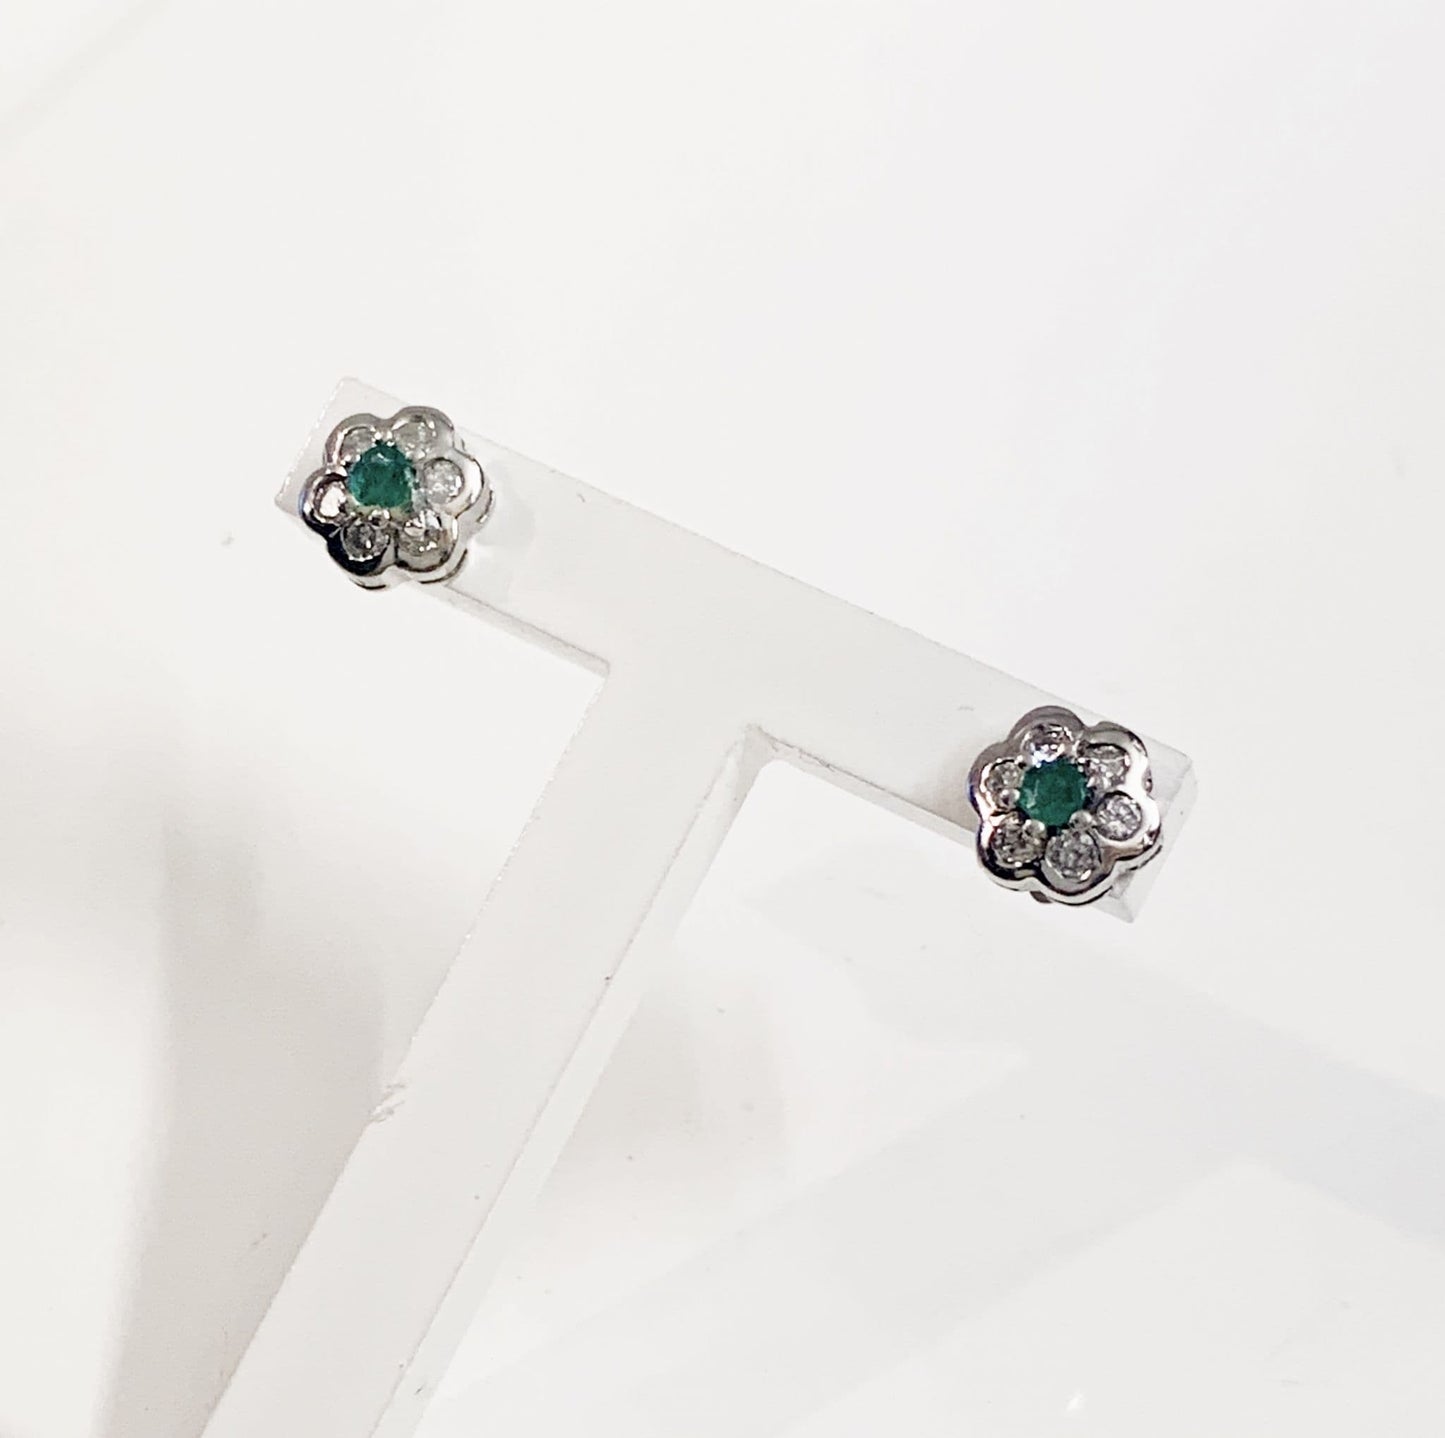 Real emerald and diamond stud earrings white gold round daisy cluster